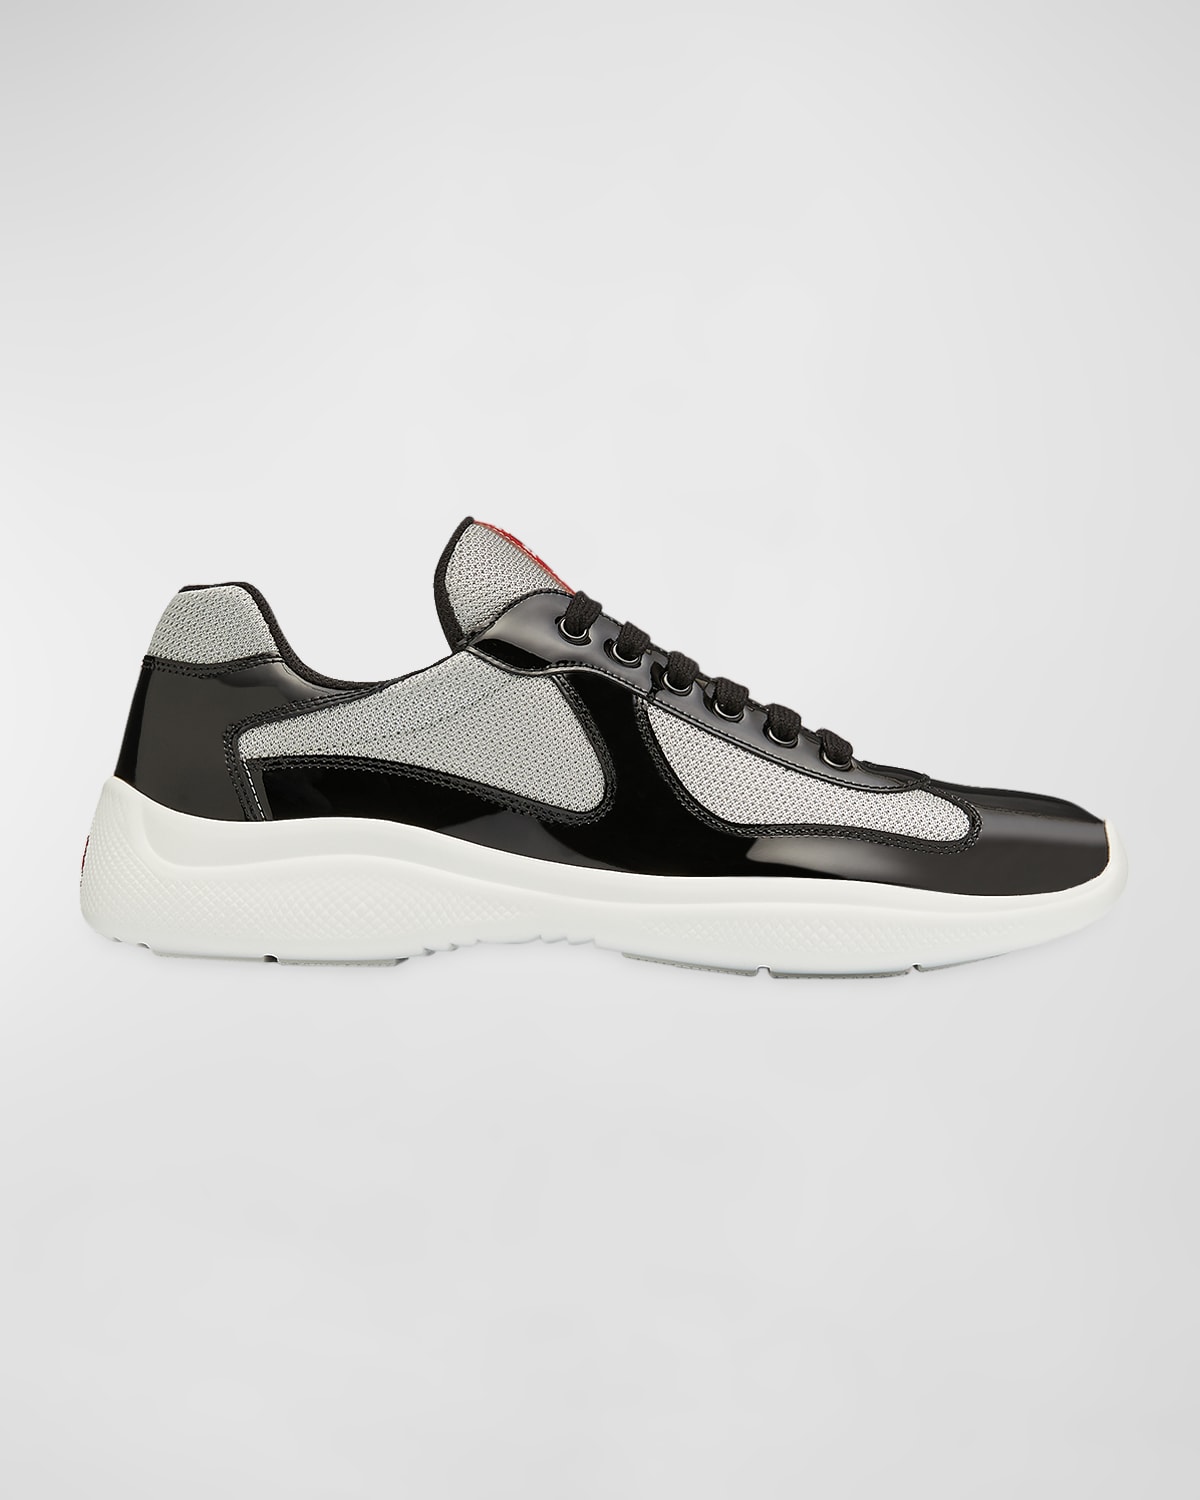 Prada Men's America's Cup Patent Leather Patchwork Sneakers In Nero Argento 1